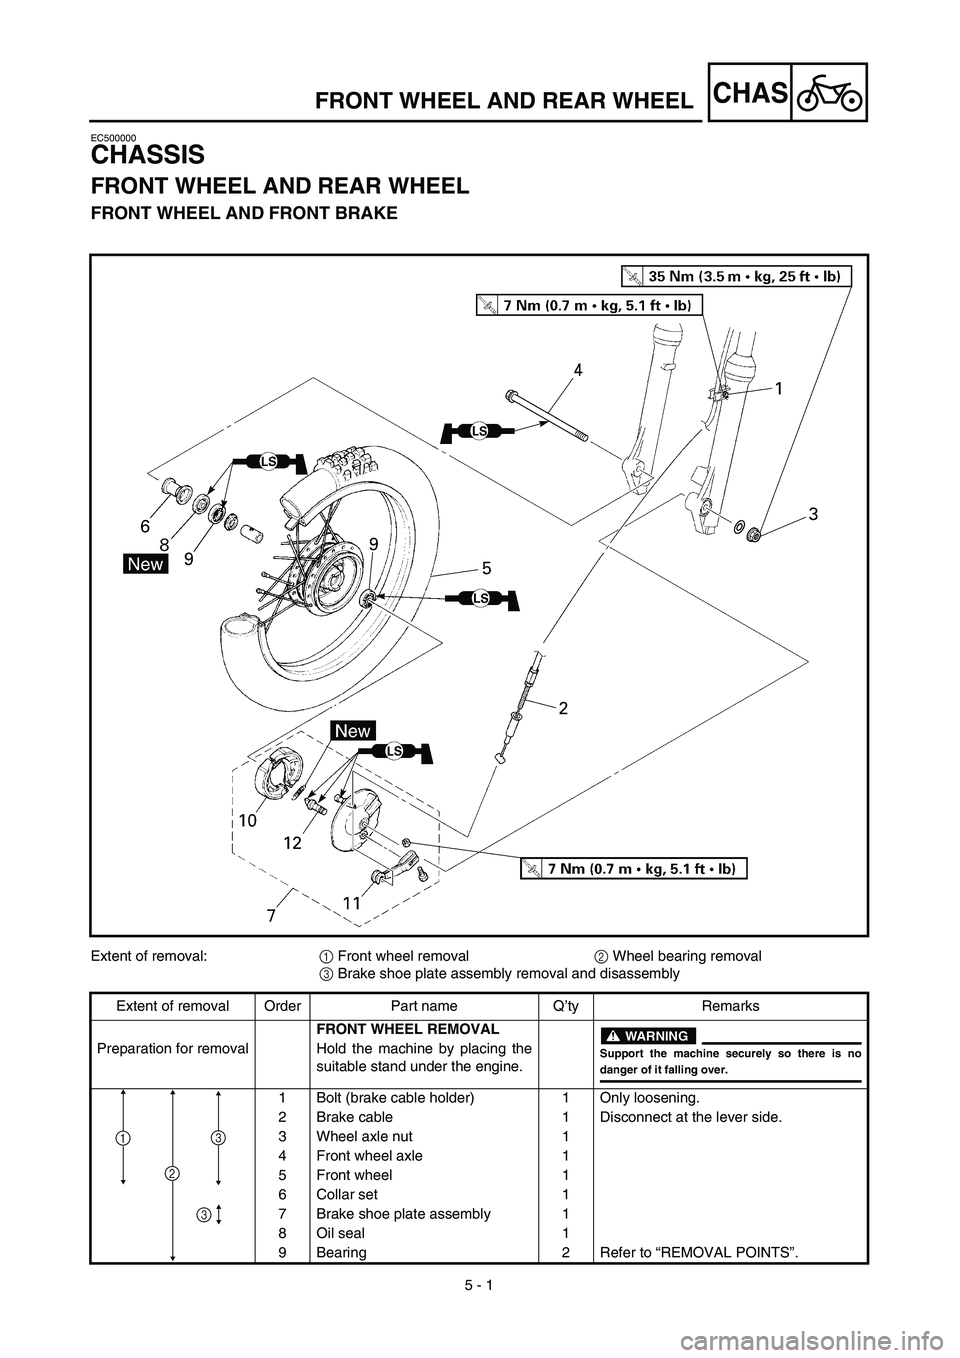 YAMAHA TTR90 2003  Owners Manual  
5 - 1
CHAS
 
EC500000 
CHASSIS 
FRONT WHEEL AND REAR WHEEL 
FRONT WHEEL AND FRONT BRAKE 
FRONT WHEEL AND REAR WHEEL 
Extent of removal:  
1  
 Front wheel removal  
2  
 Wheel bearing removal  
3  
